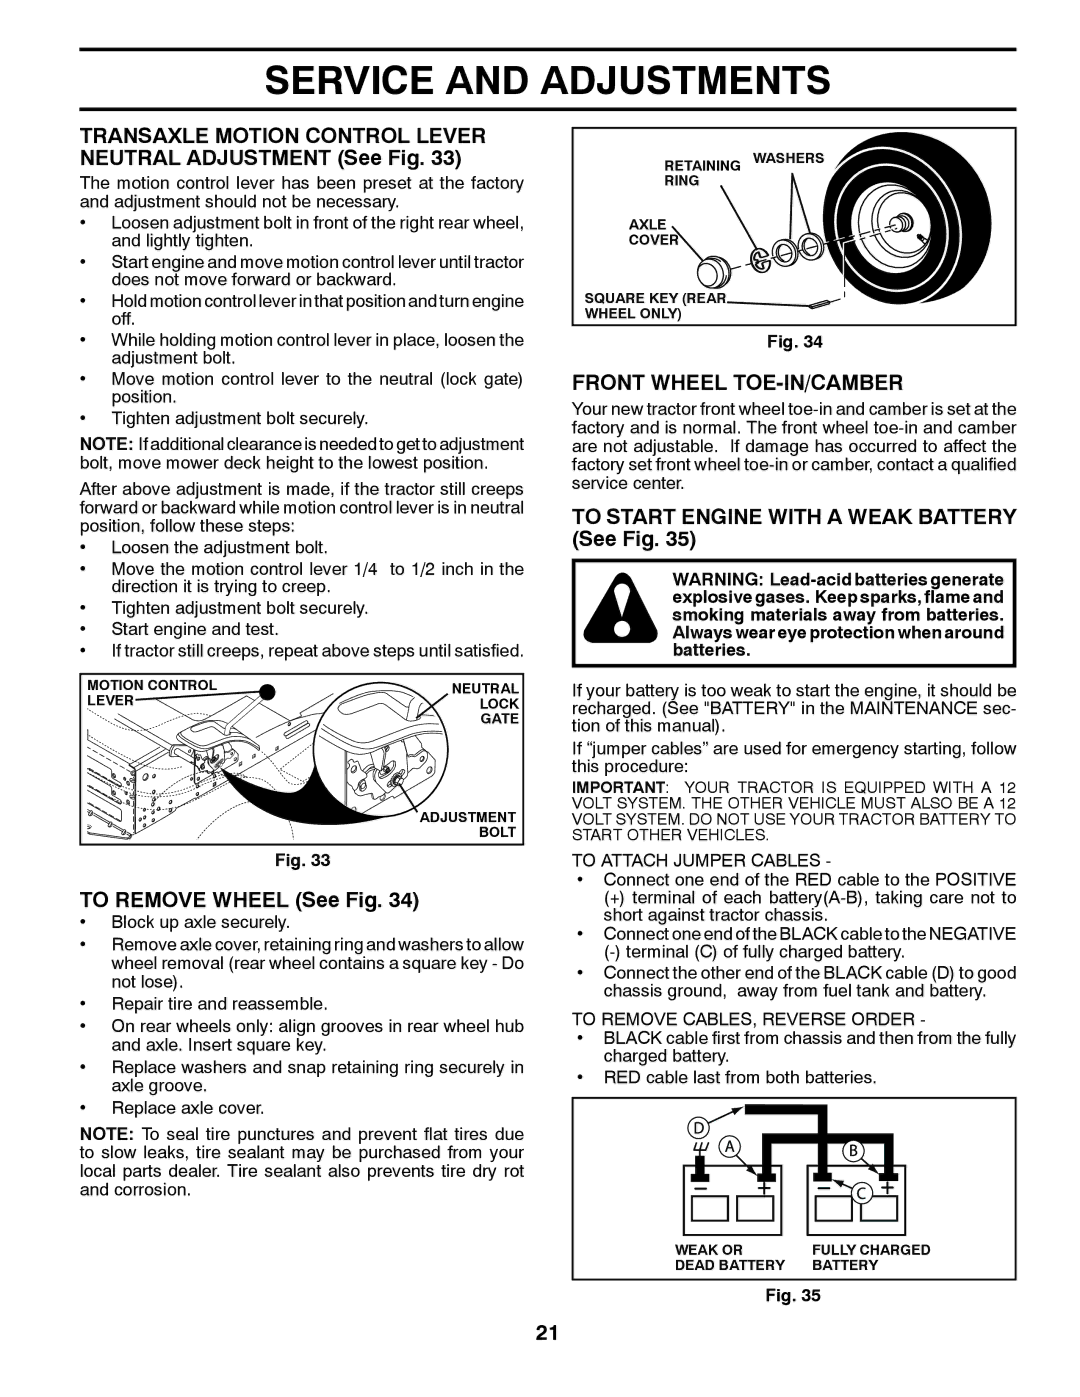 Husqvarna 917.28961 owner manual Transaxle Motion Control Lever Neutral Adjustment See Fig, To Remove Wheel See Fig 